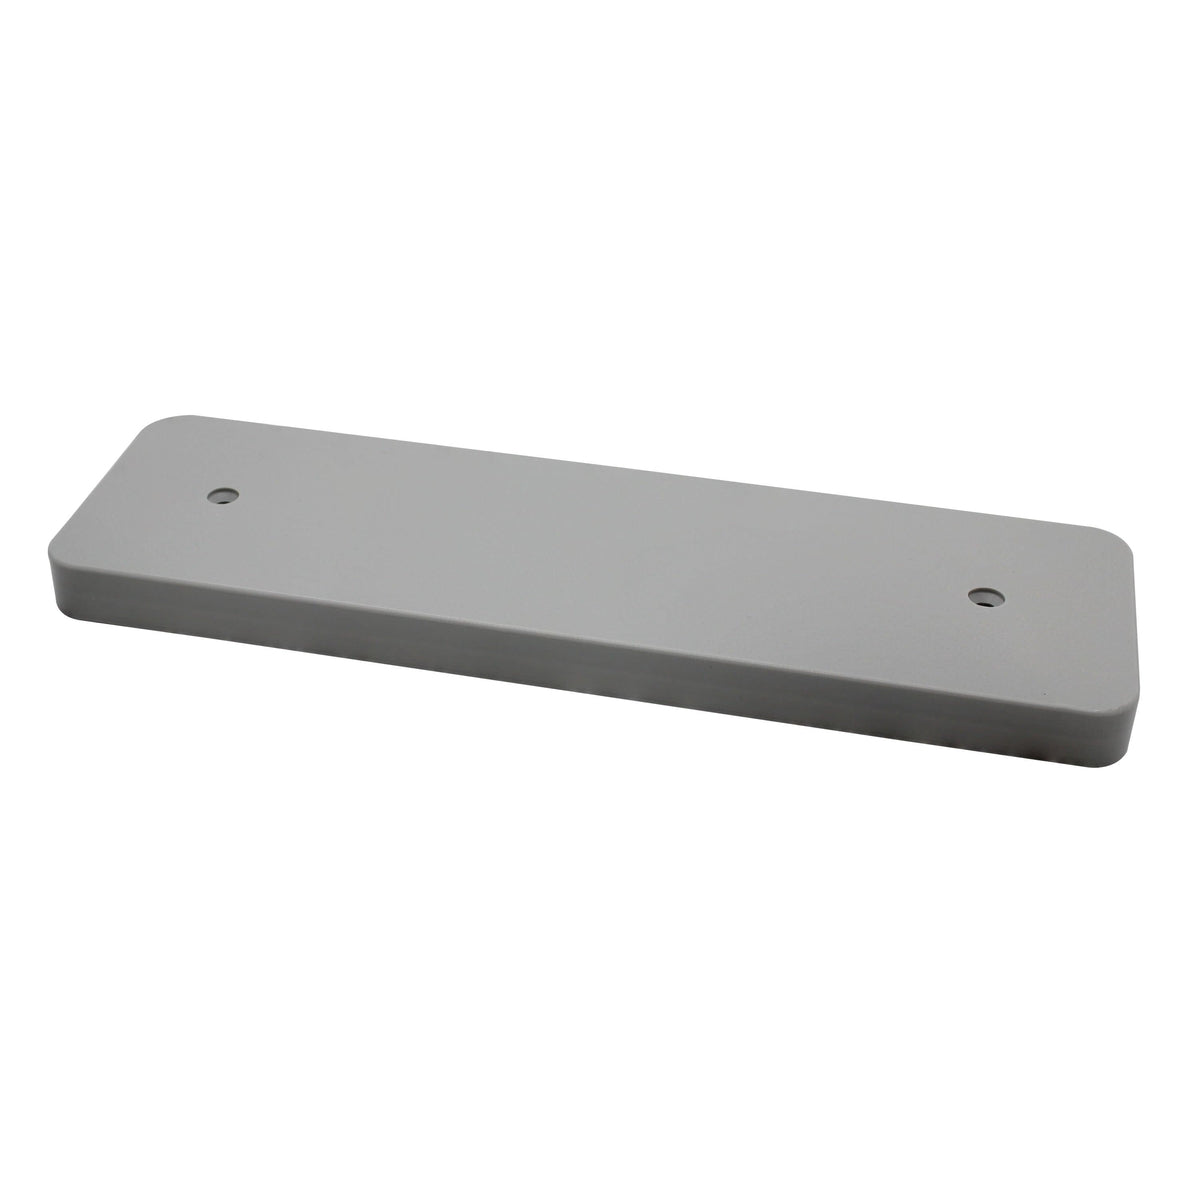 Boat Zone Qualifies for Free Shipping Boat Zone Transducer Plate 12" Gray #BRDGRY12